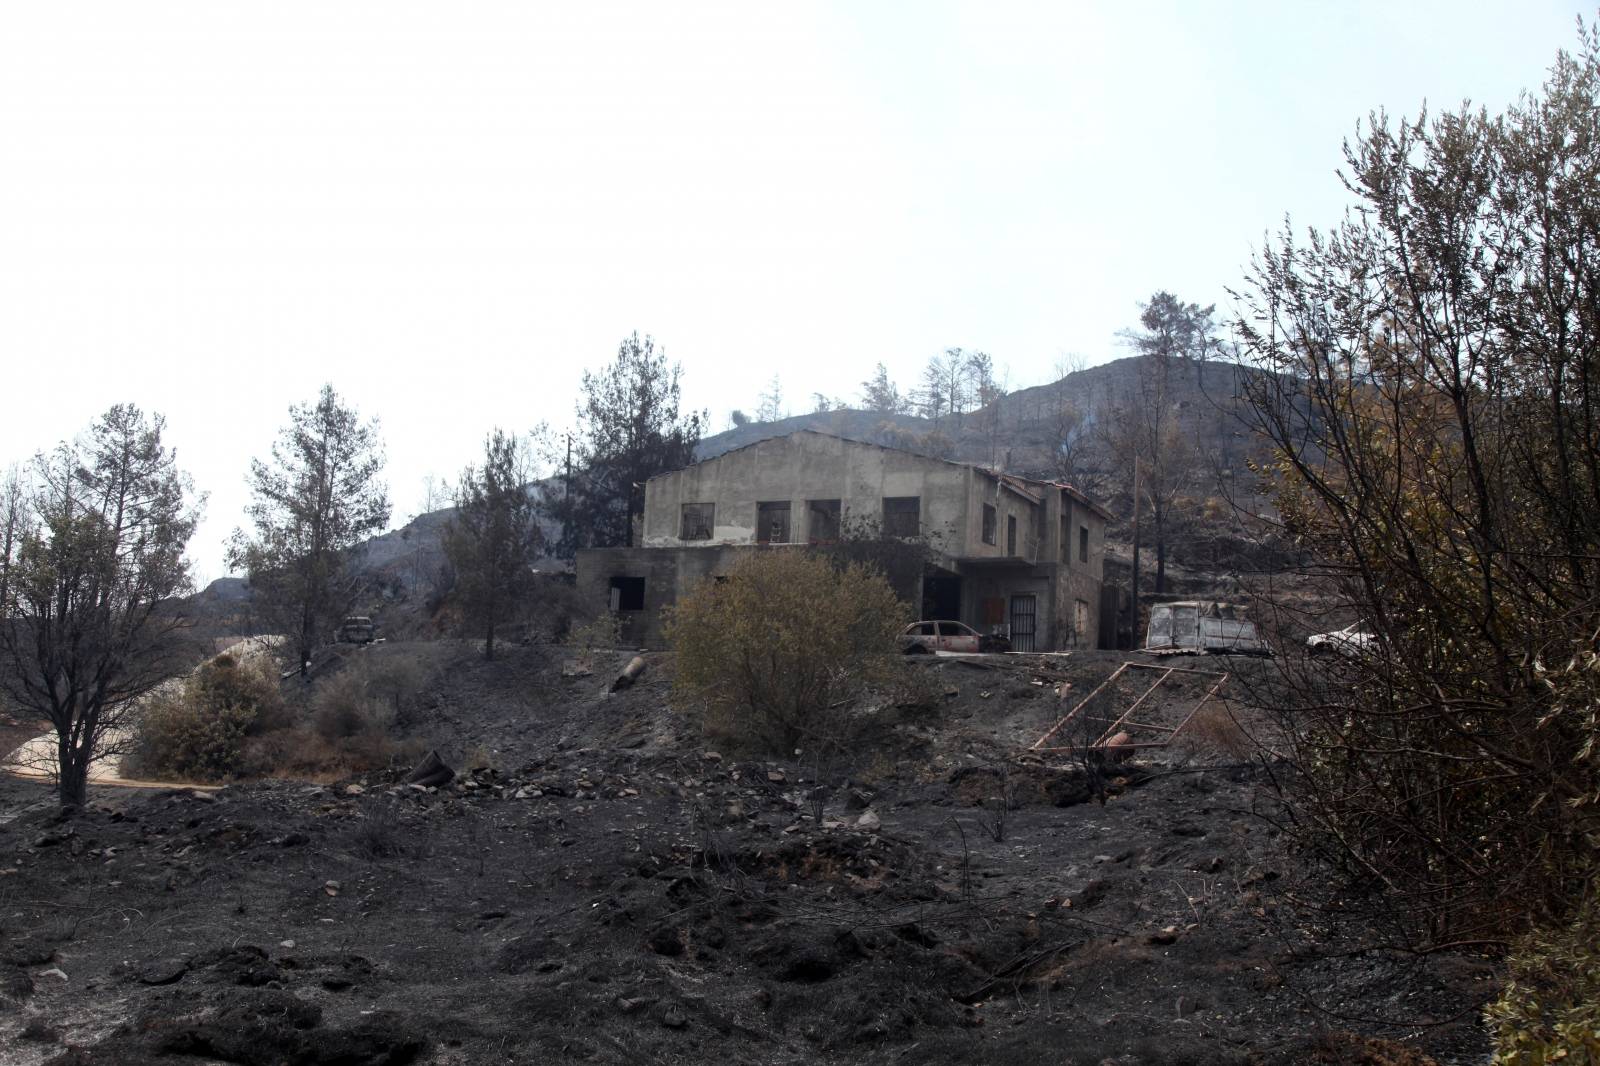 Burned trees and a damaged house are seen following a wildfire near the village of Melini, in the Larnaca mountain region